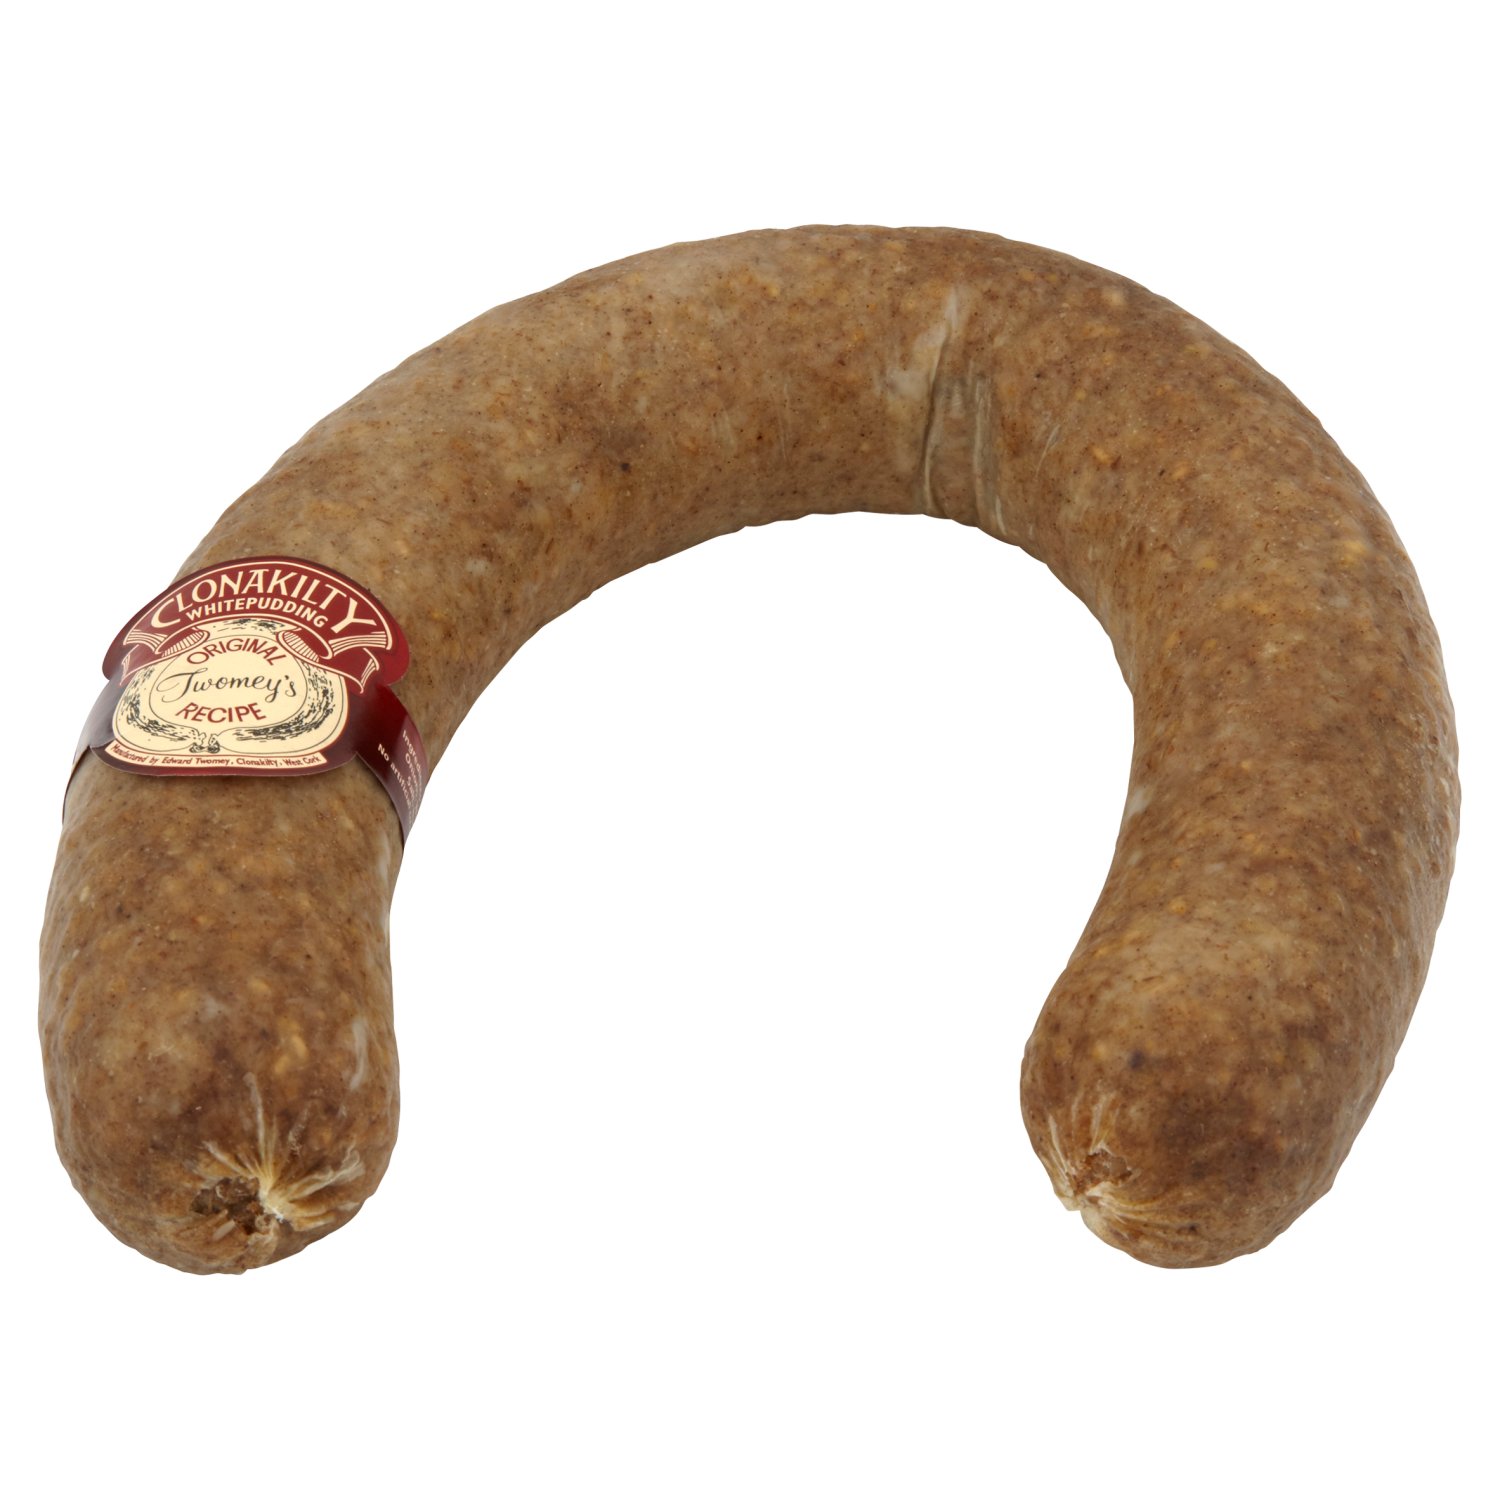 Loose Clonakilty White Pudding  (1 kg)